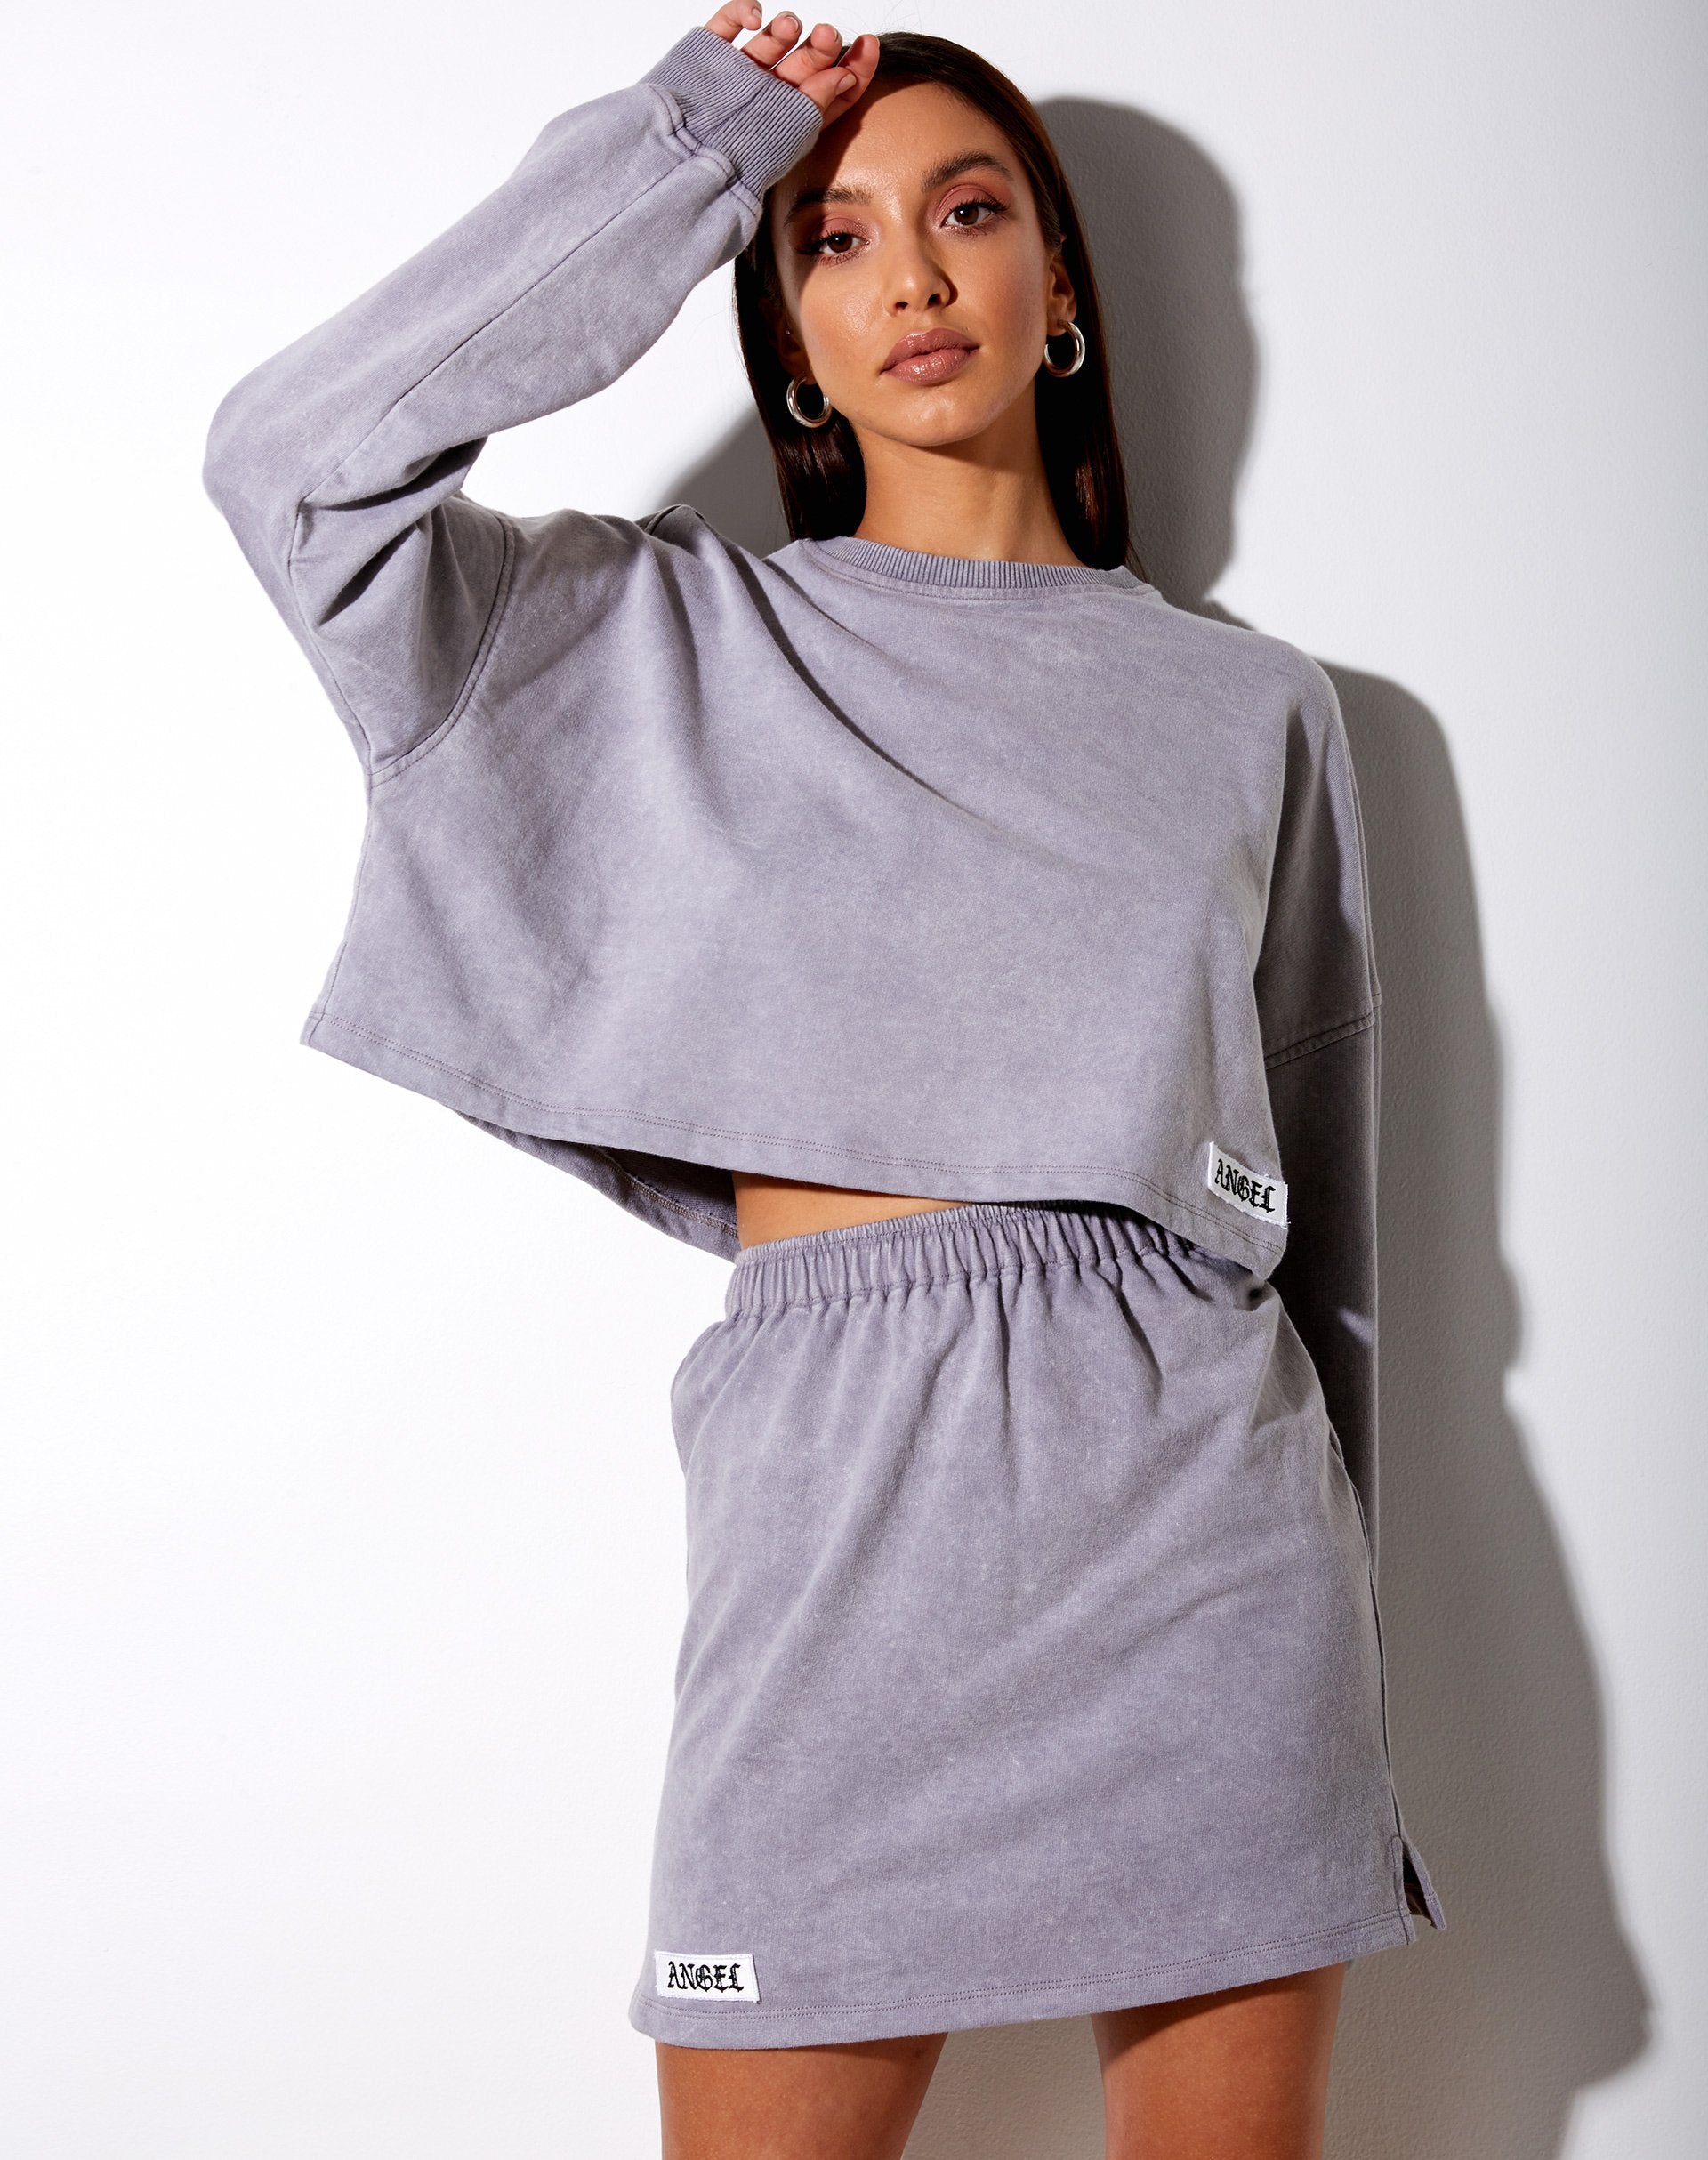 Image of Fawly Crop Top in Grey Wash Angel Embro Label